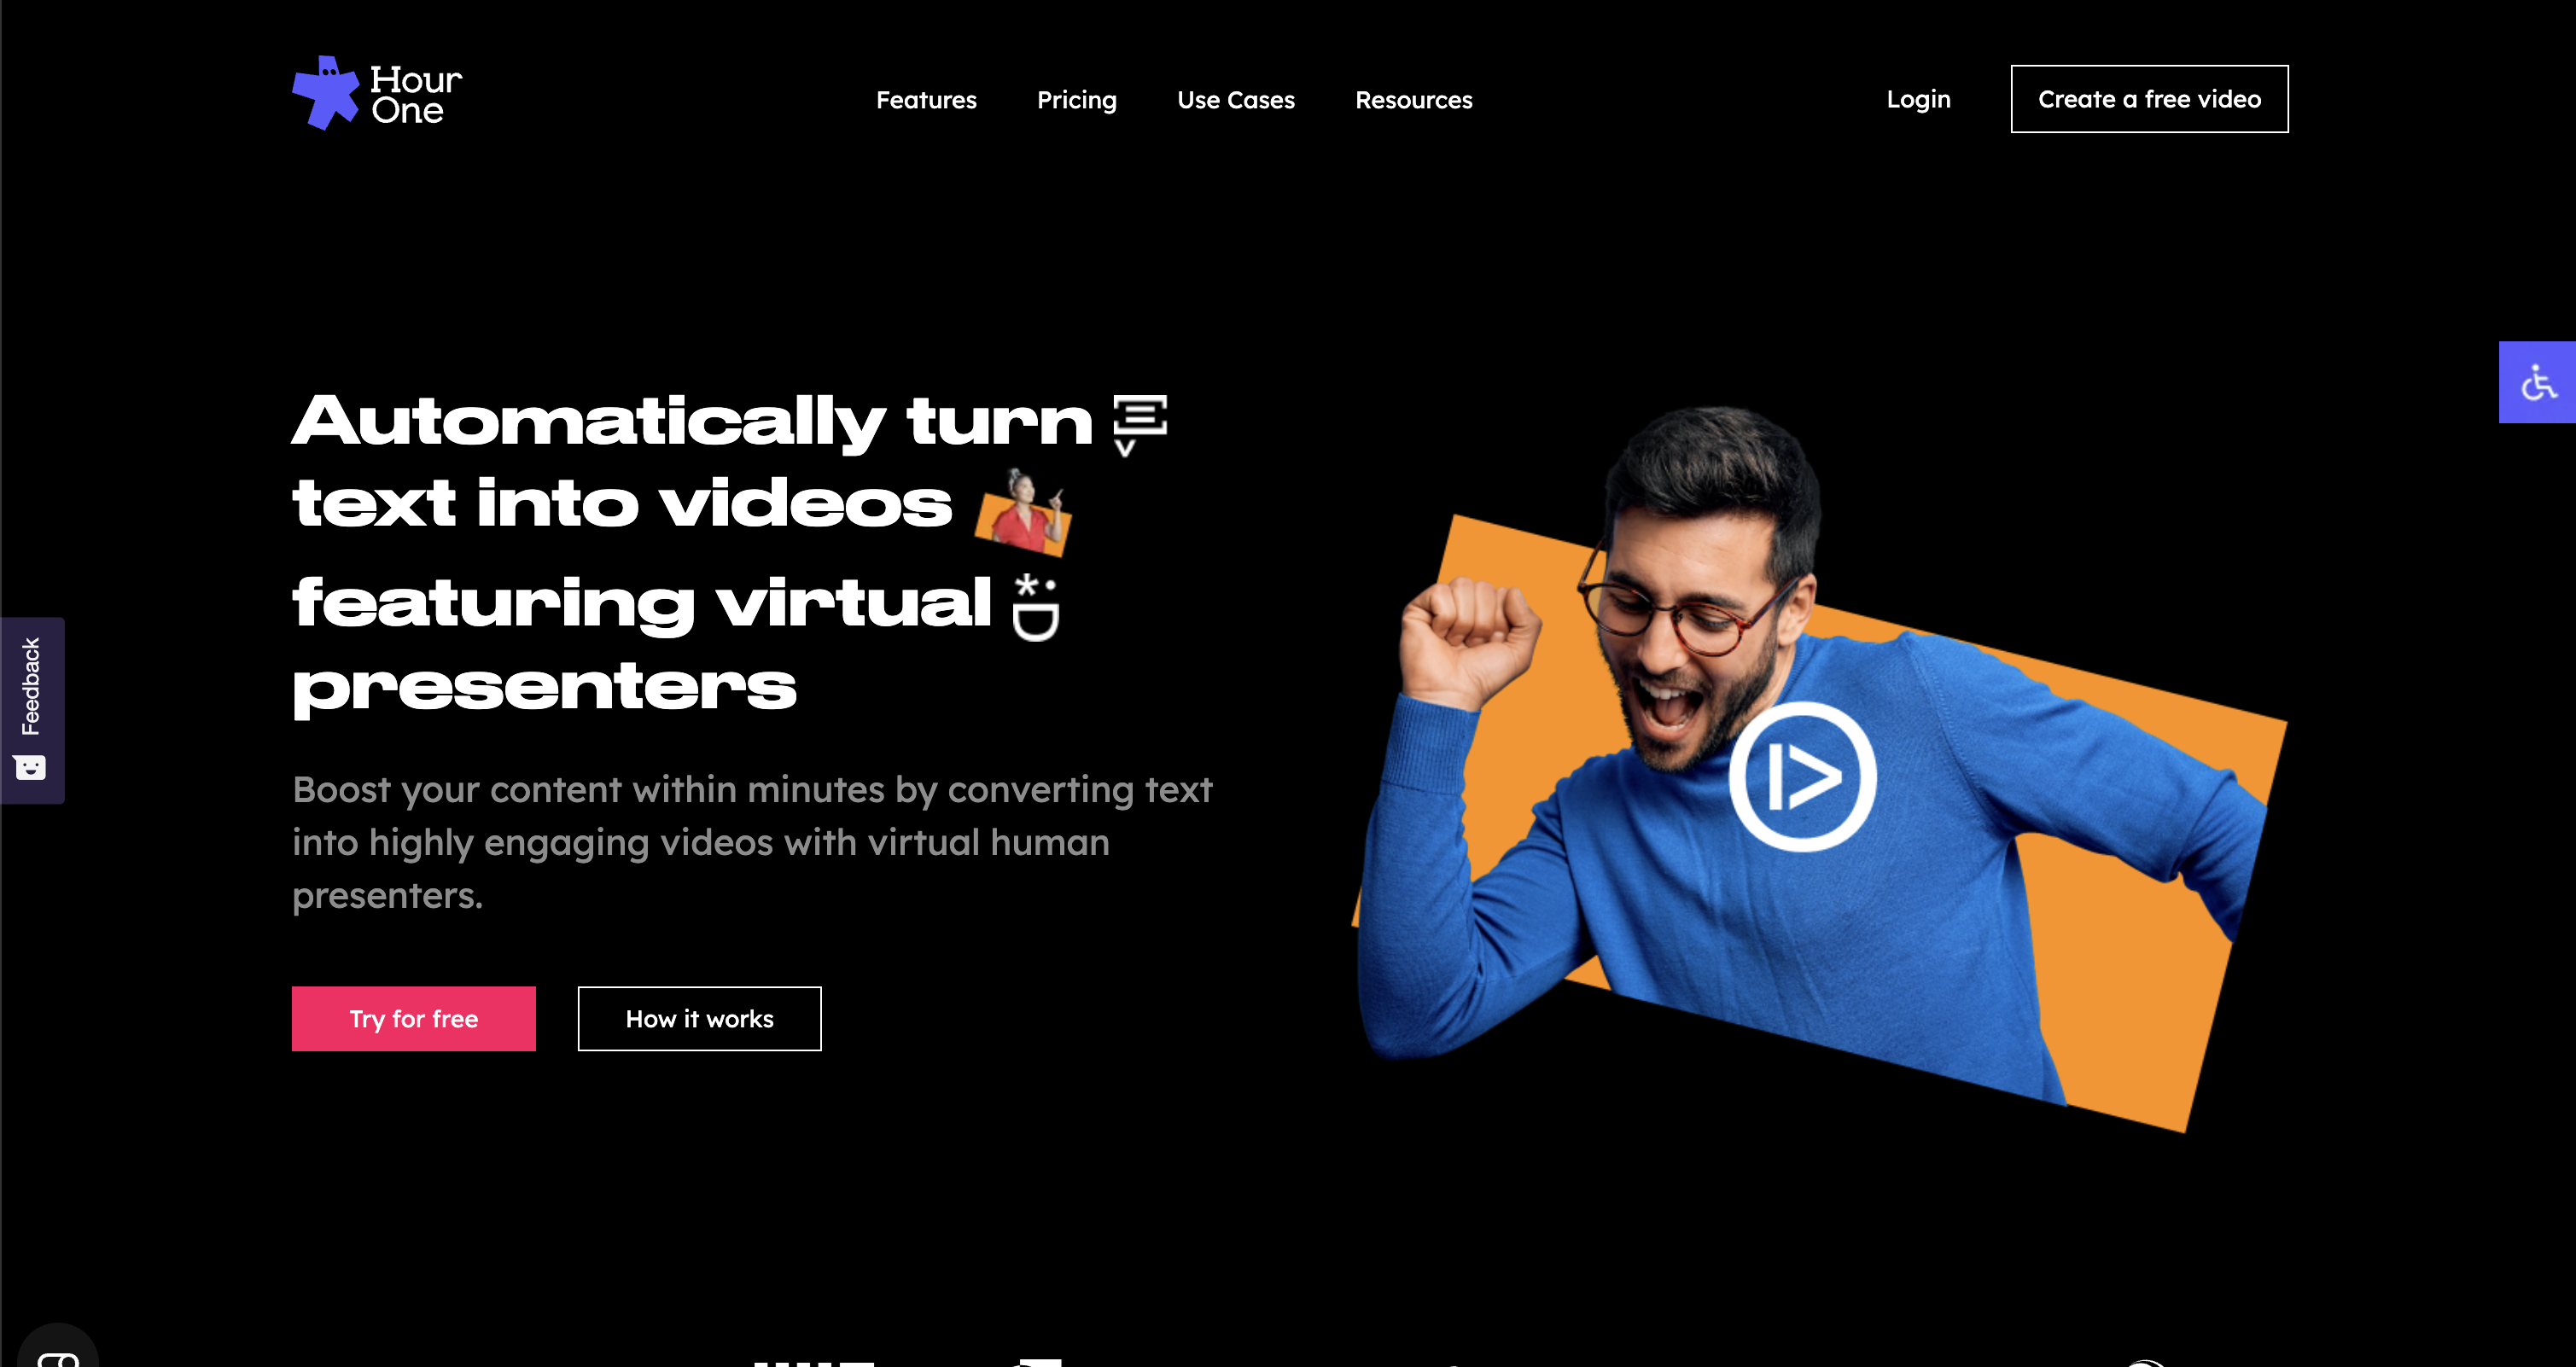 HourOne.AI: The Ultimate Video Creation Platform for Everyone!